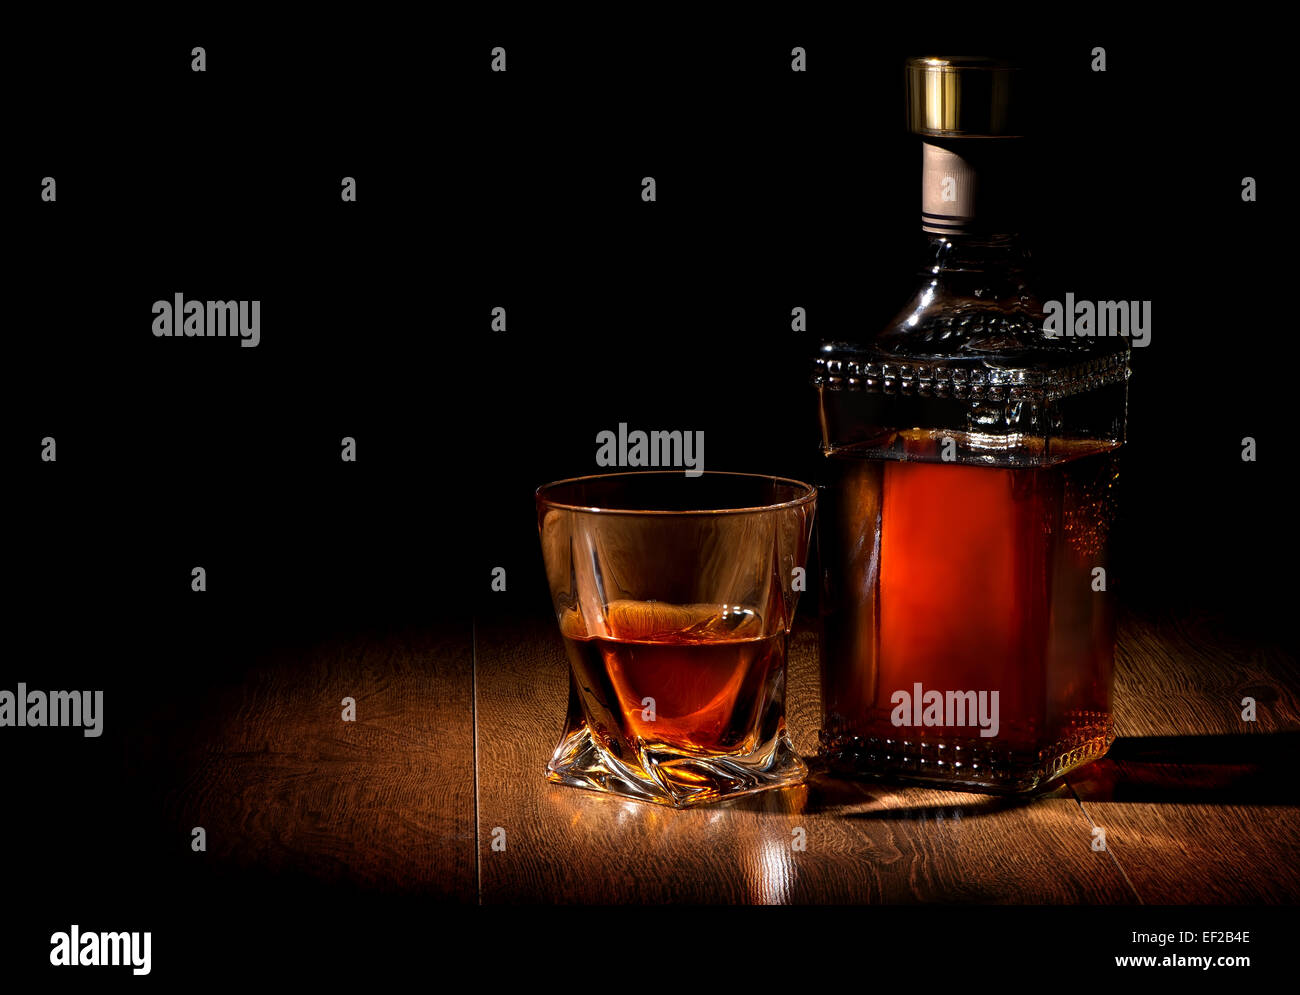 Bottle and glass of whiskey on a wooden table Stock Photo